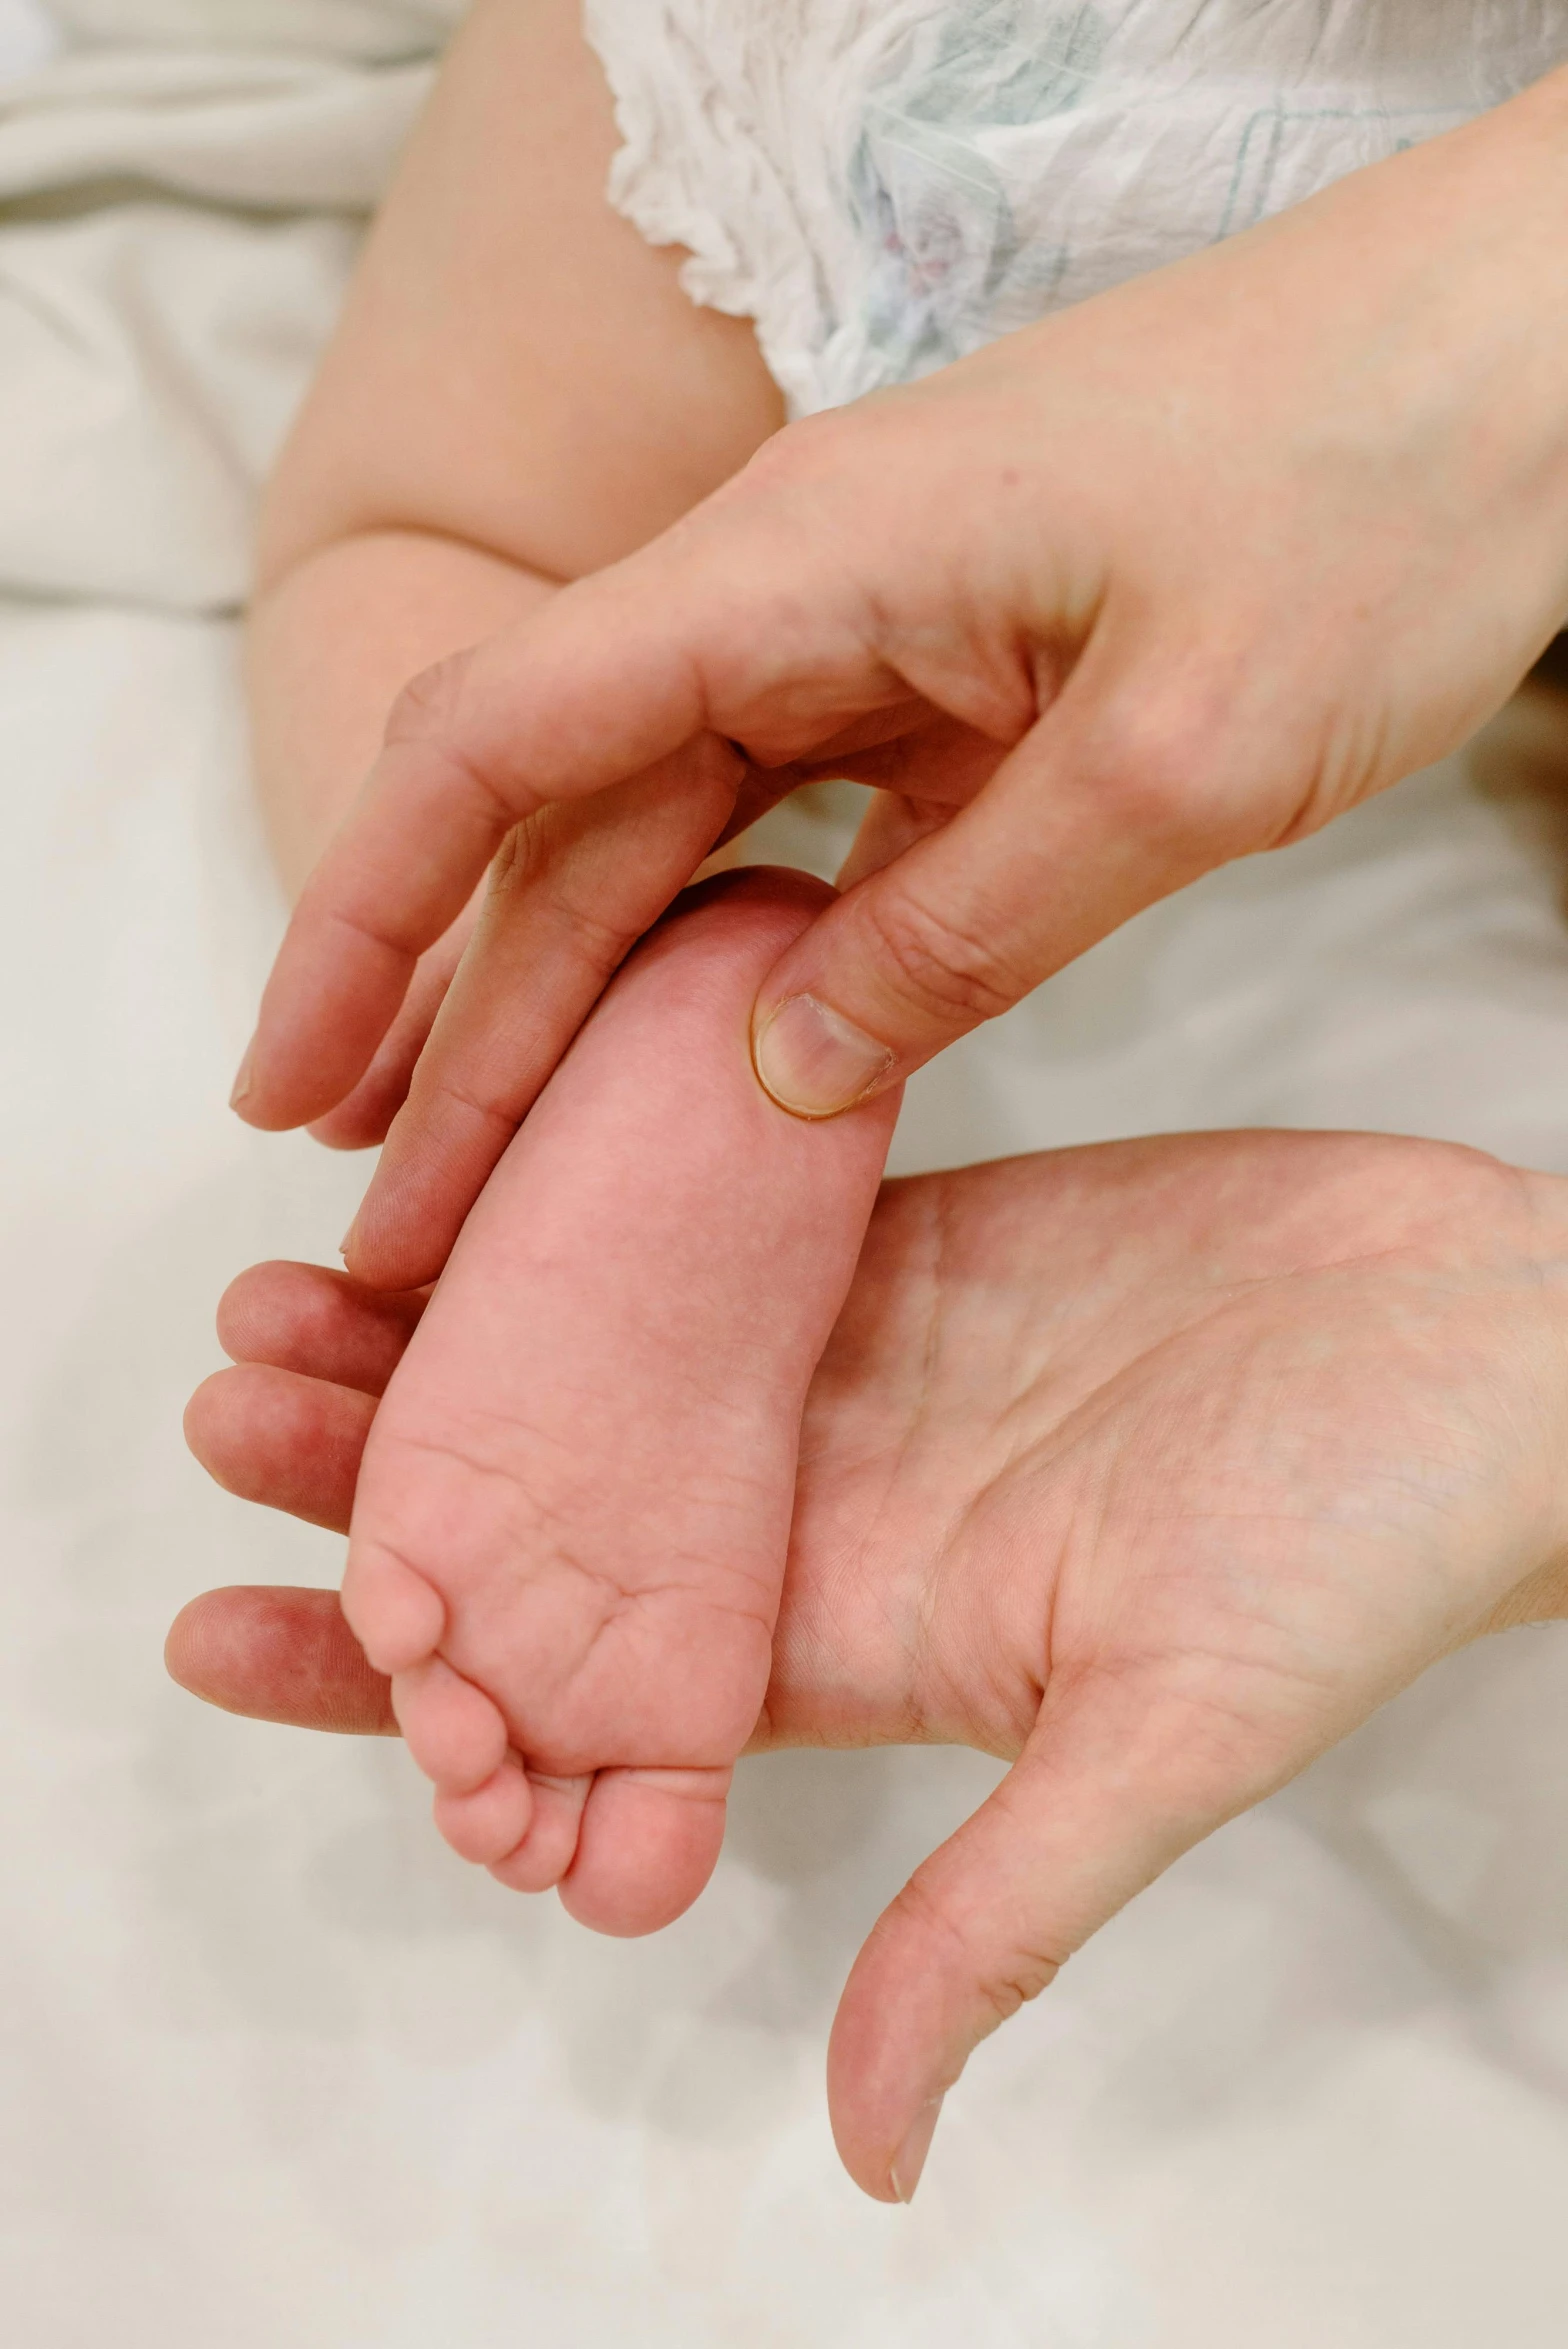 a close up of a person holding a baby's foot, corrected hands, soft volume absorbation, uploaded, small